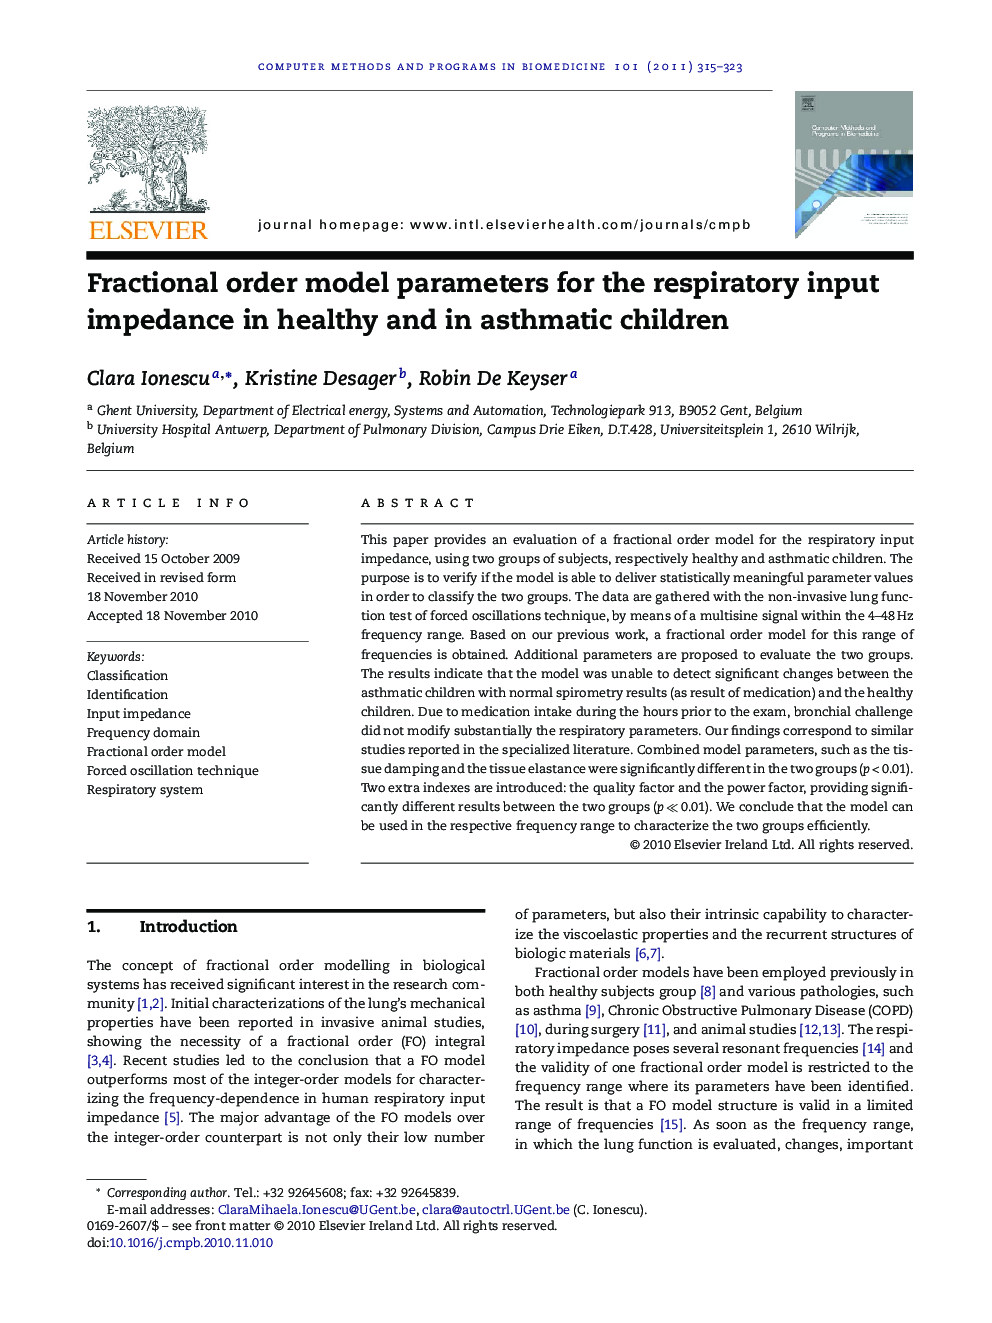 Fractional order model parameters for the respiratory input impedance in healthy and in asthmatic children